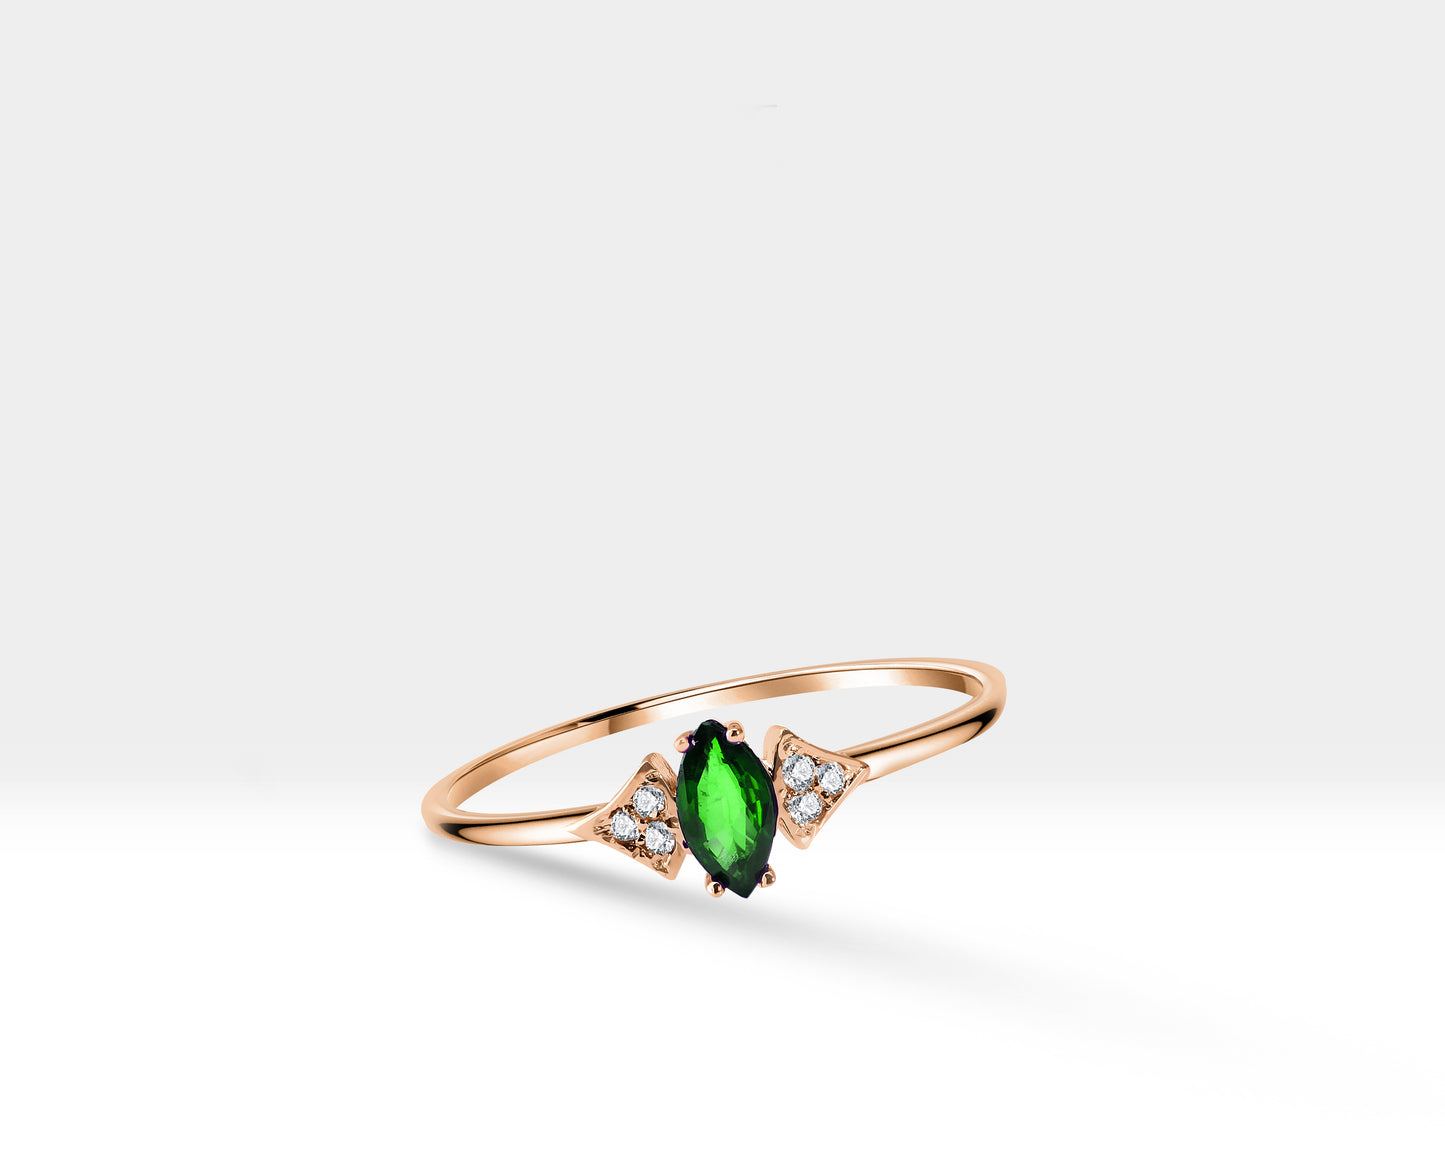 14K Yellow Gold Ring,Gold Band Ring,Marquise Cut Emerald and Diamond Ring